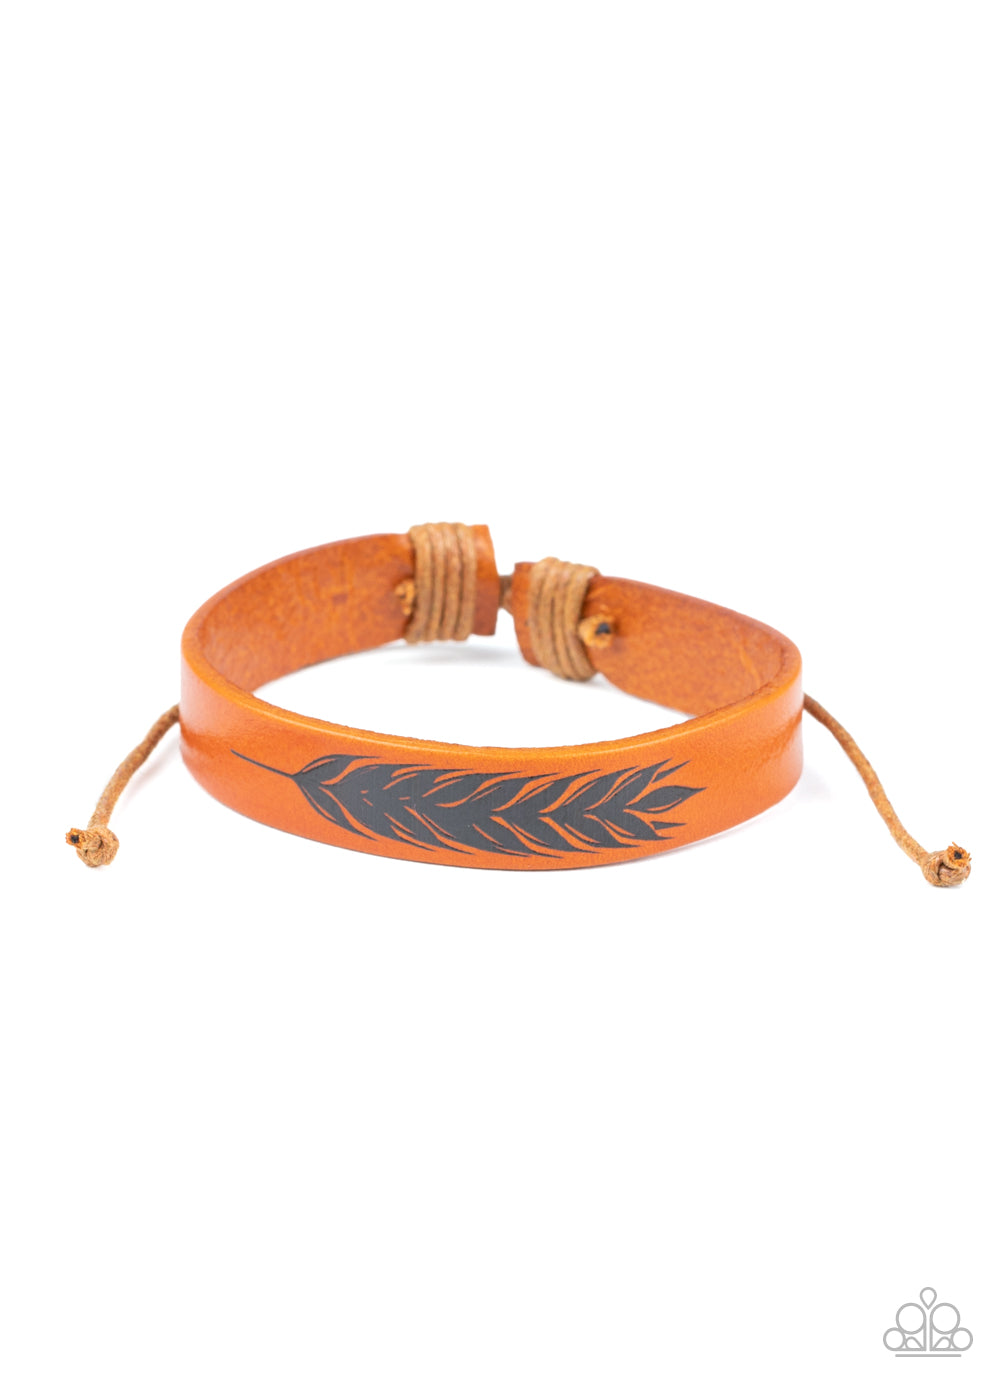 This QUILL All Be Yours - Brown Urban Bracelet